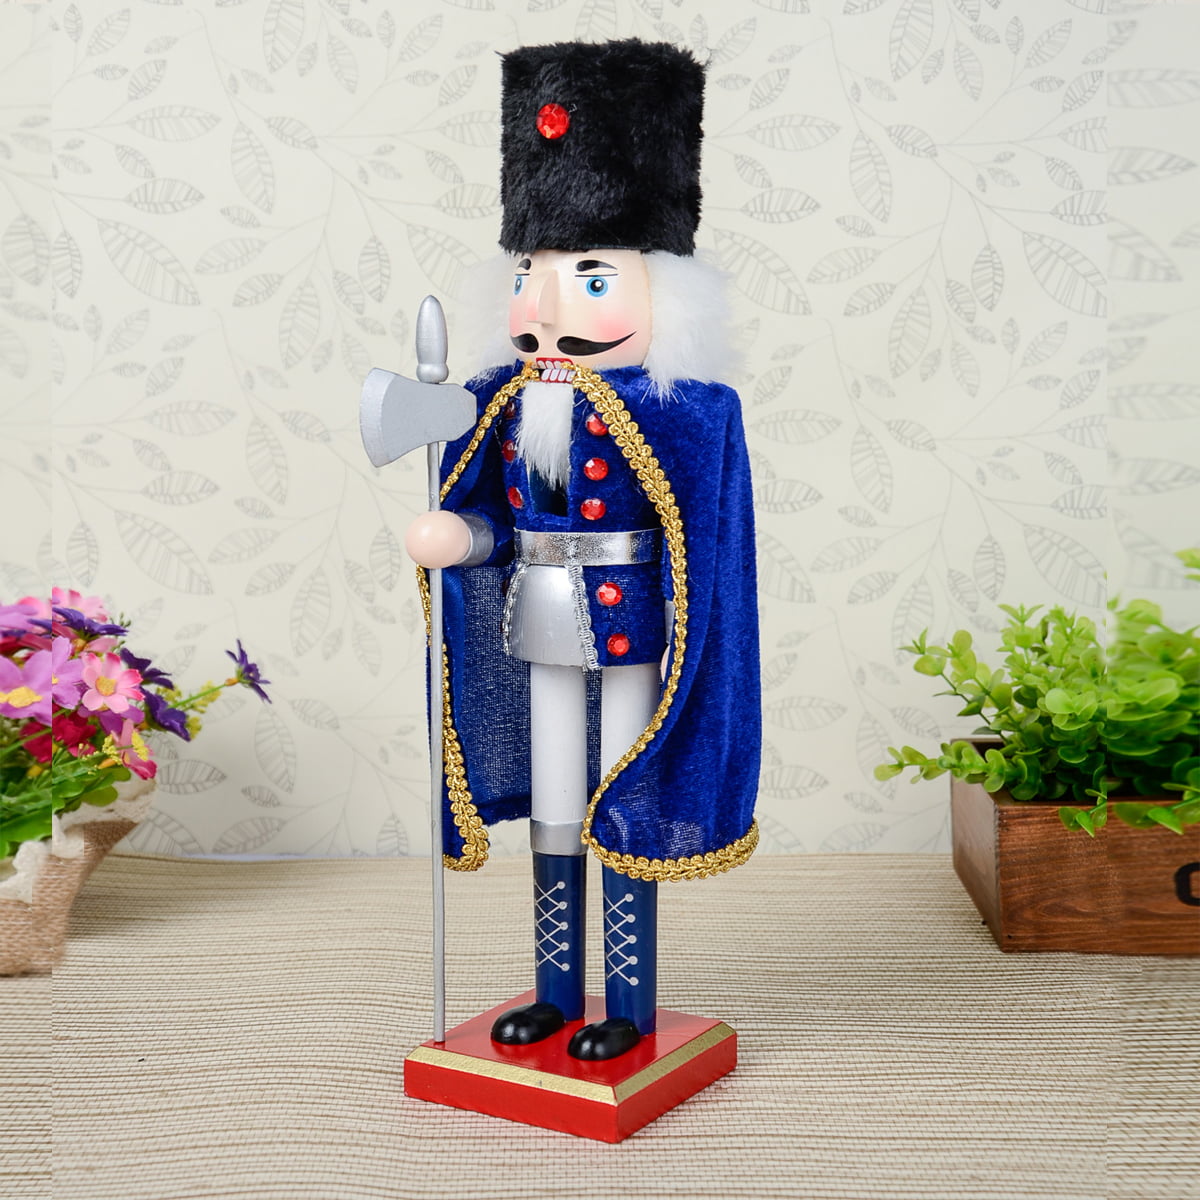 King and Soldier Figurine Display Ornaments Set for Christmas Decor Bagpipe A/A 12 Inches Christmas Decoration Wooden Soldier Nutcracker 